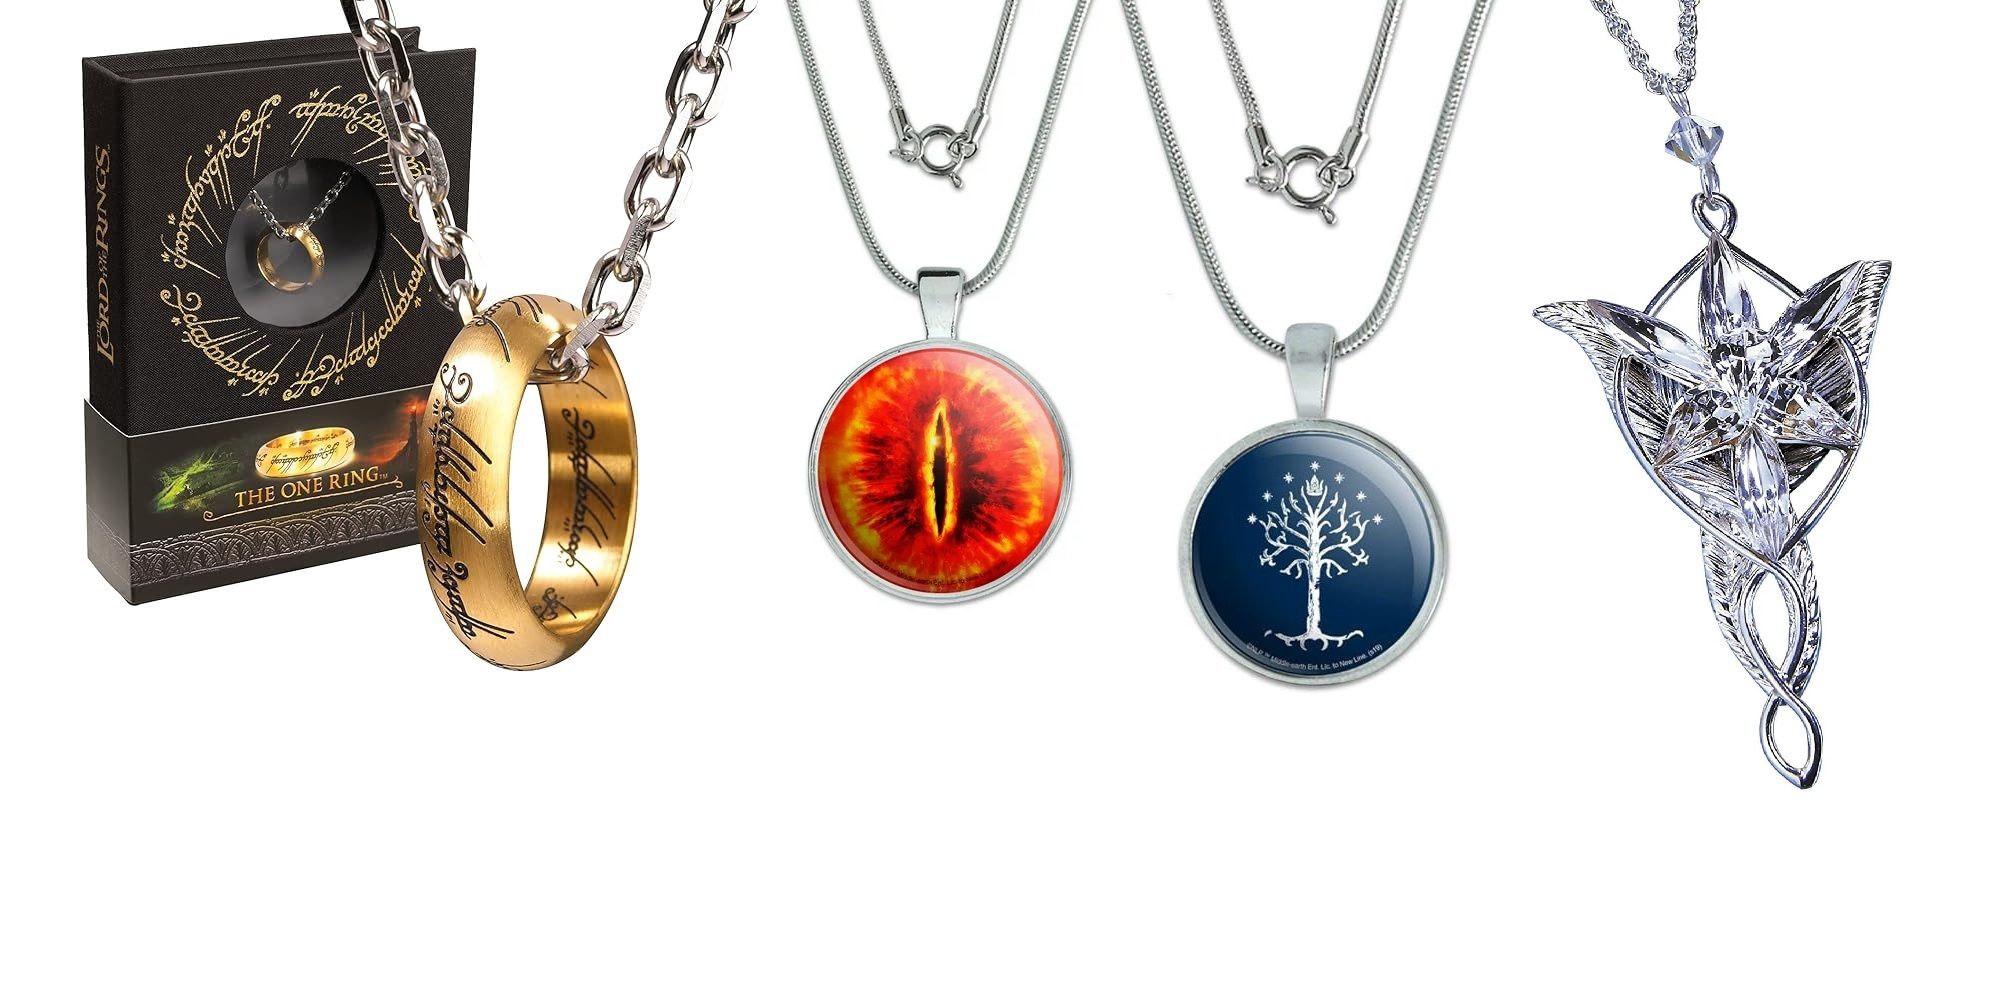 Best Lord of the Rings Jewelry image clearer hopefully centered